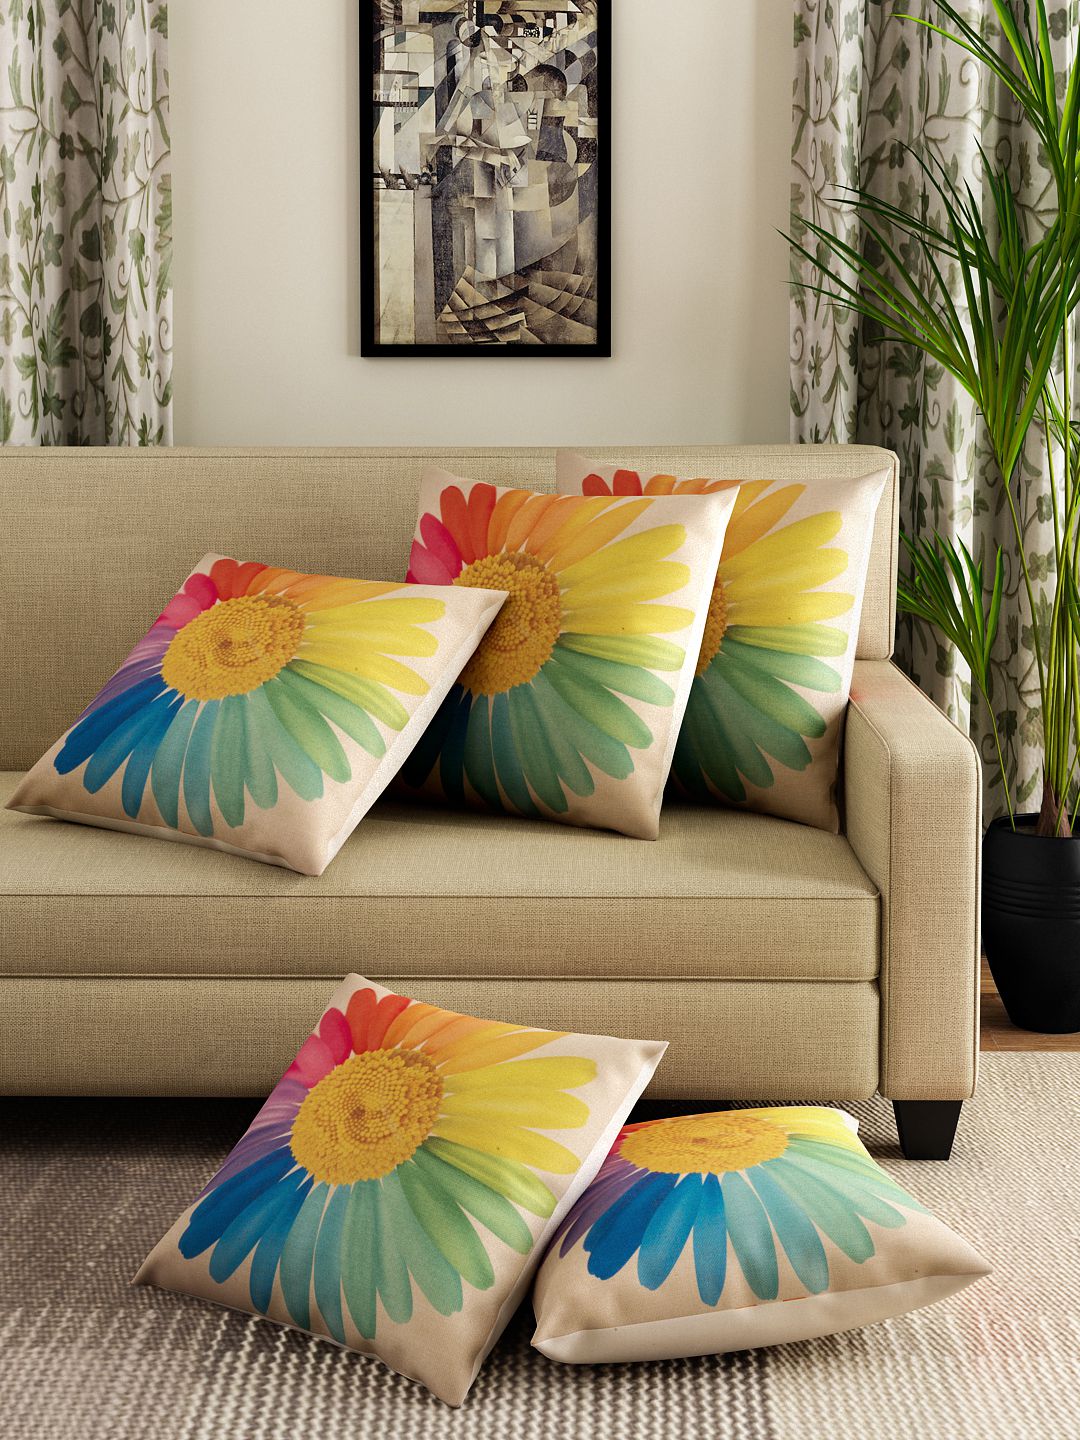     			Romee Set of 5 40X40 cm (16X16) Cushion Covers Floral Themed